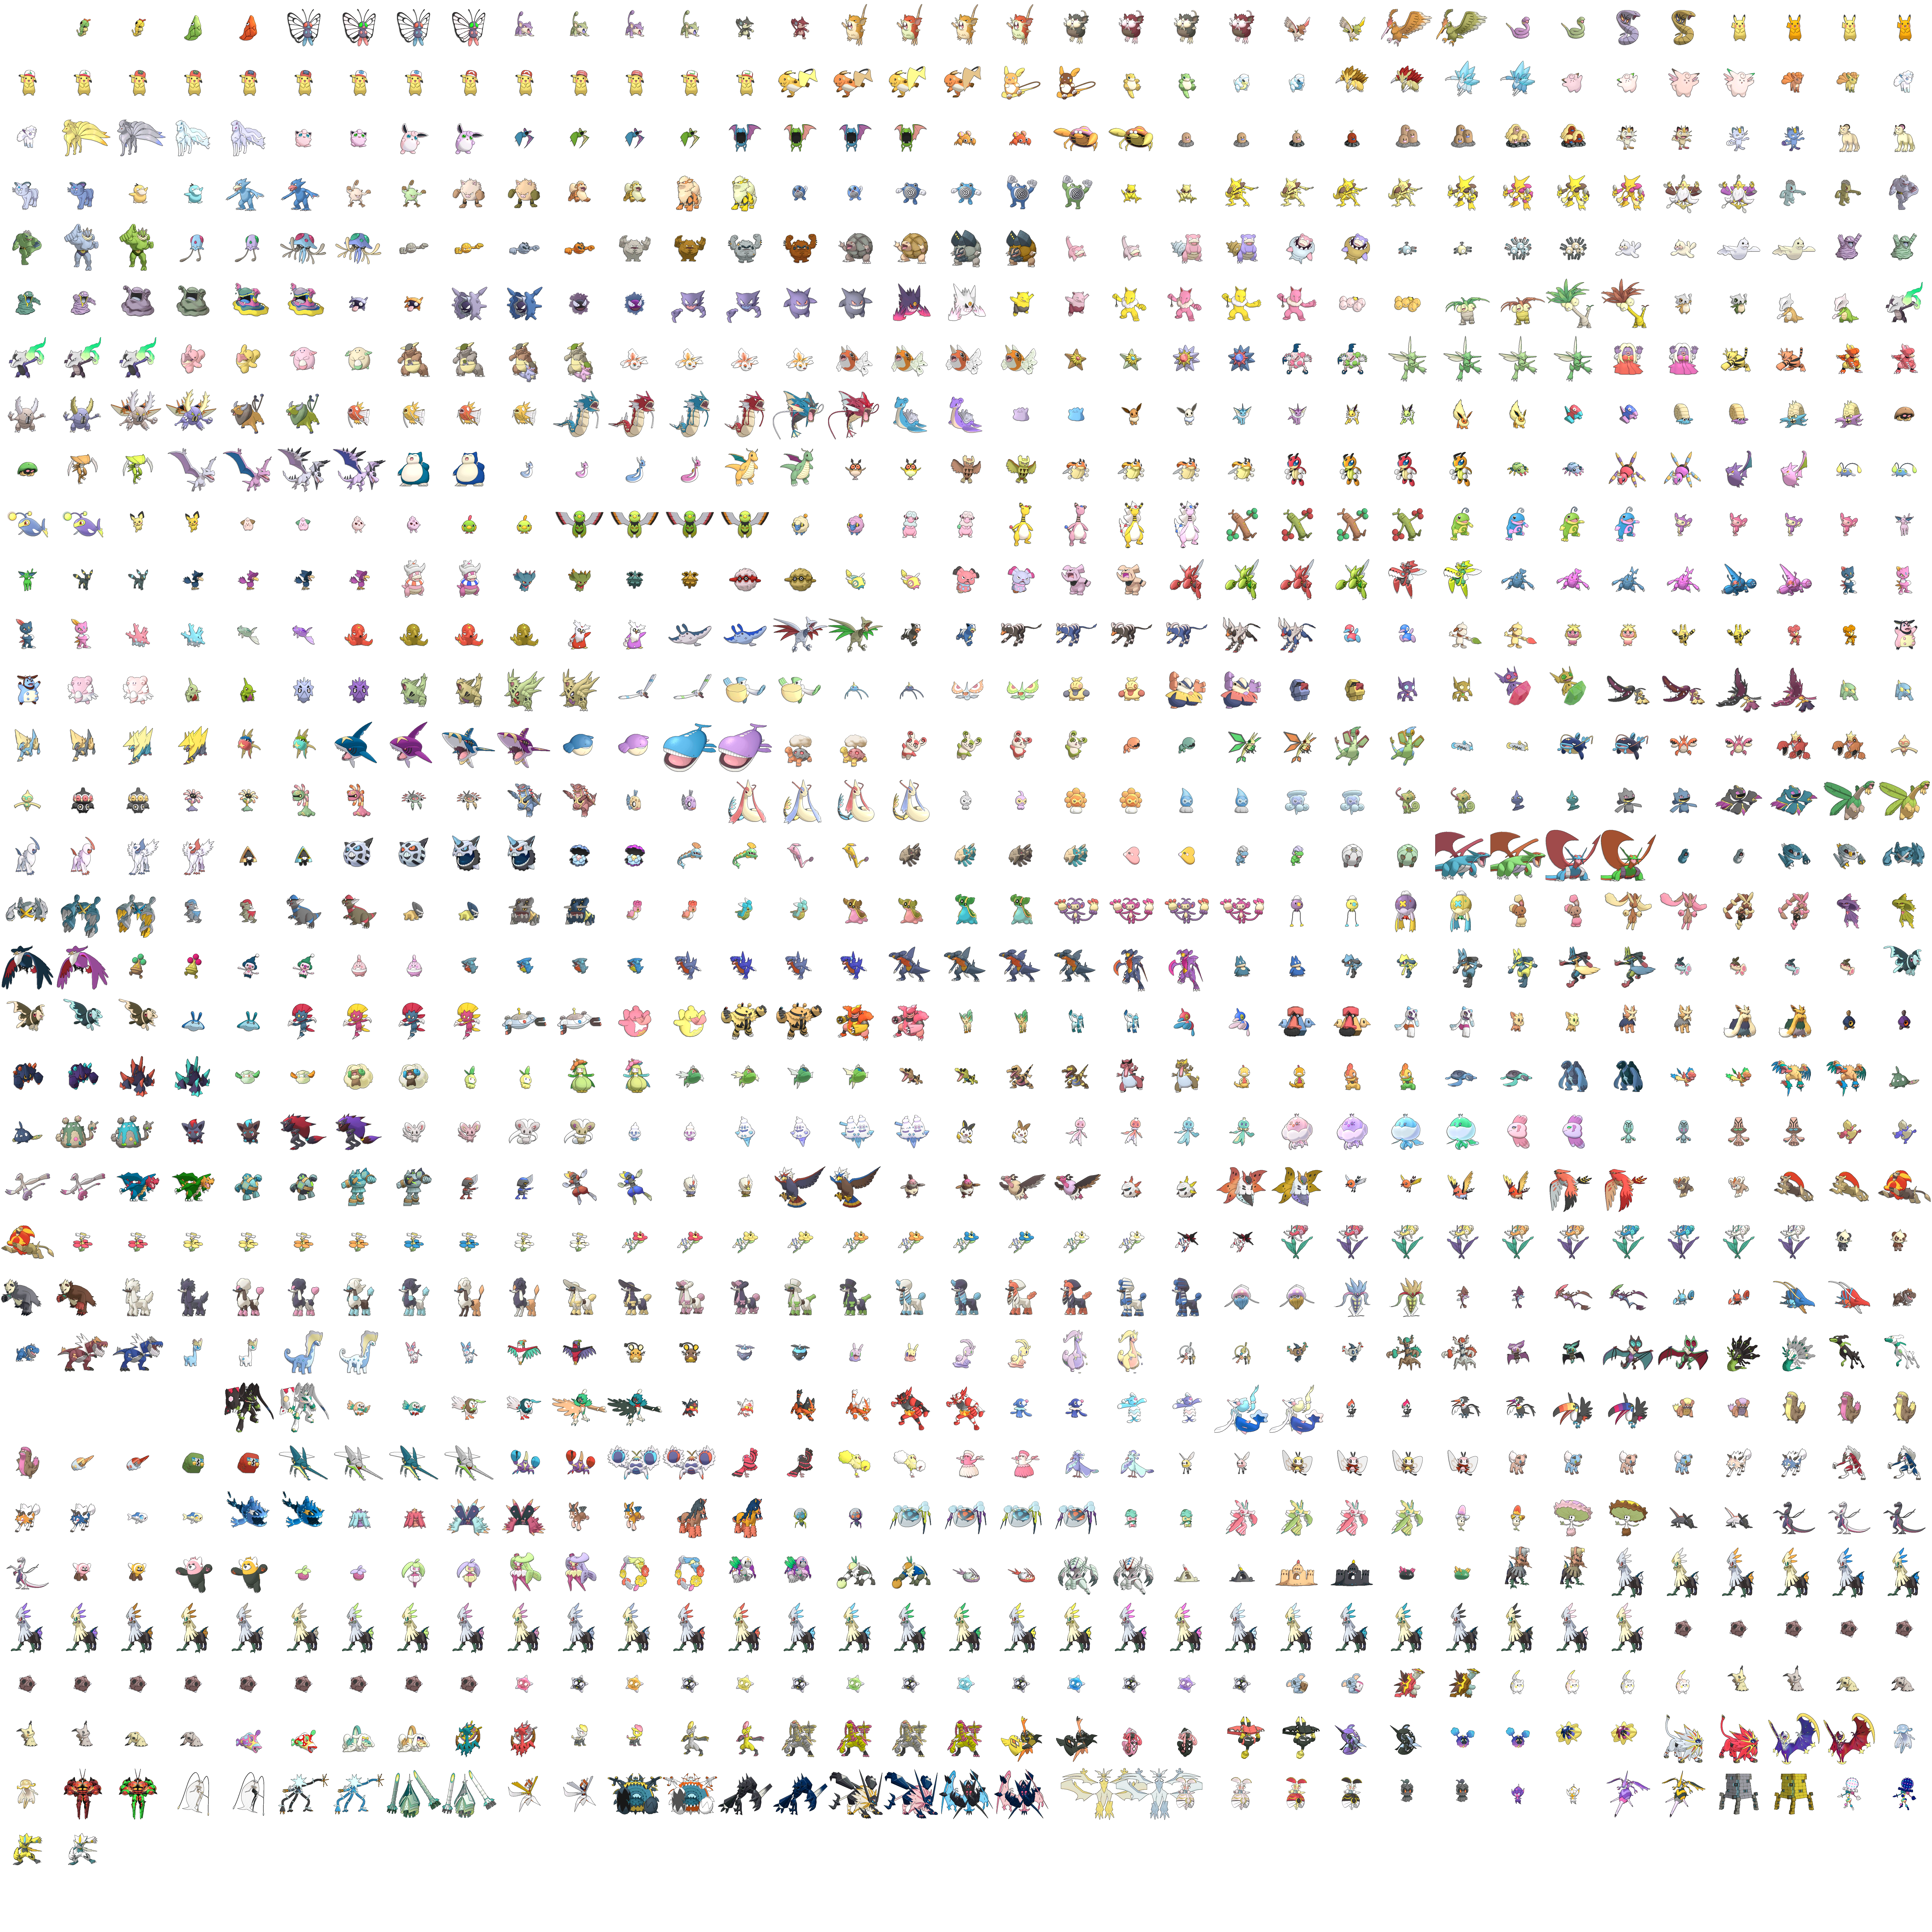 DS-style Gen VII and Beyond Pokémon Sprite Repository in 64x64